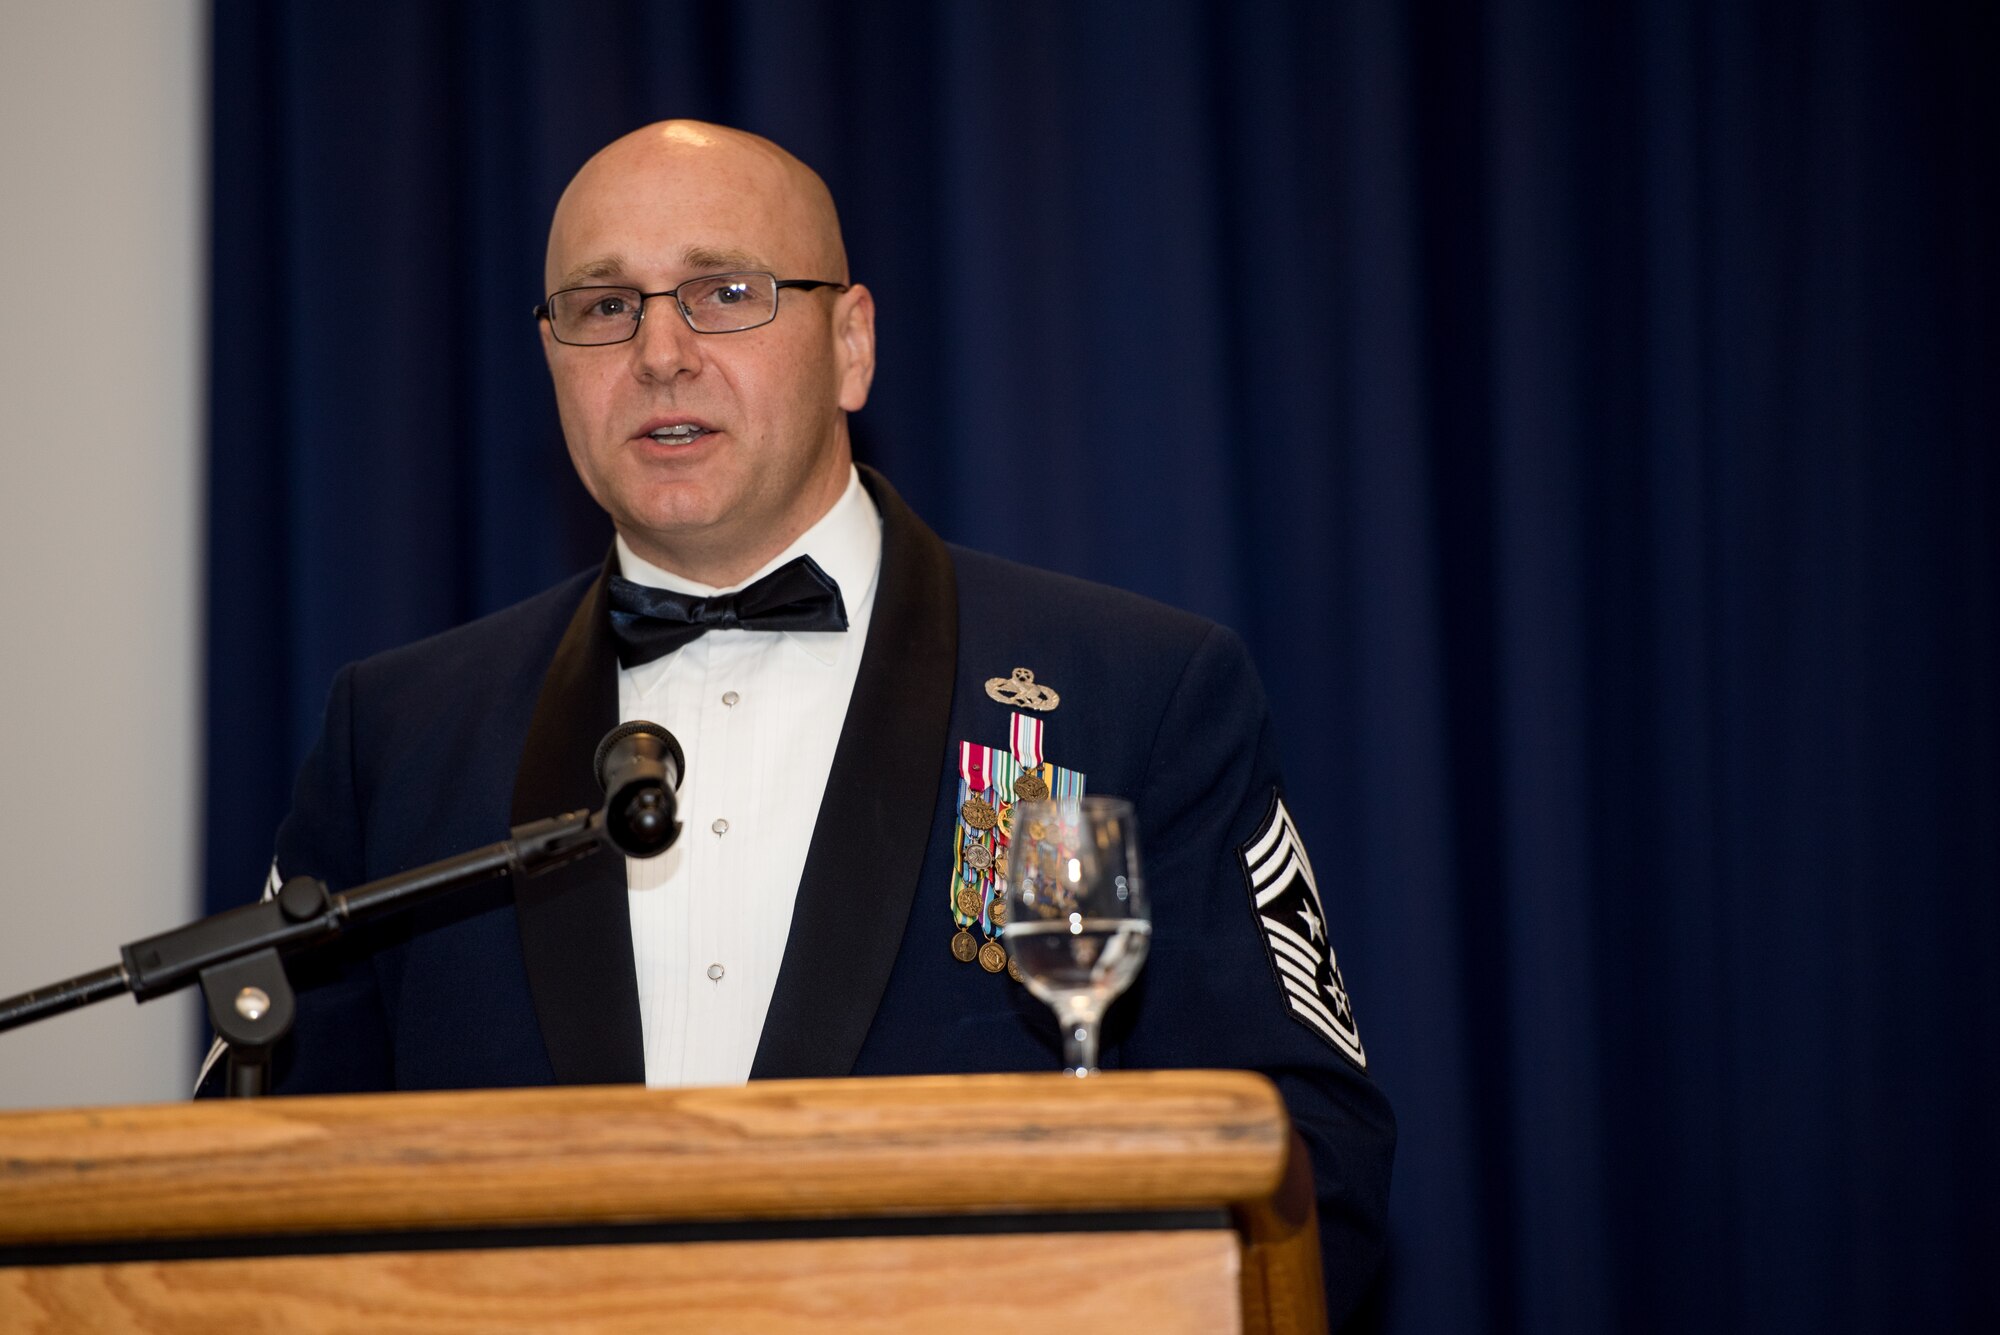 Chief Master Sgt. Anthony Green, 436th Airlift Wing command chief, speaks to  senior noncommissioned officer inductees during the senior noncommissioned officer induction ceremony at The Landings in Dover, Delaware, May 18, 2019. Thirty-two newly promoted staff sergeants were charged with new responsibilities as they accepted the role within their new rank. (U.S. Air Force photo by Capt. Katie Spencer)